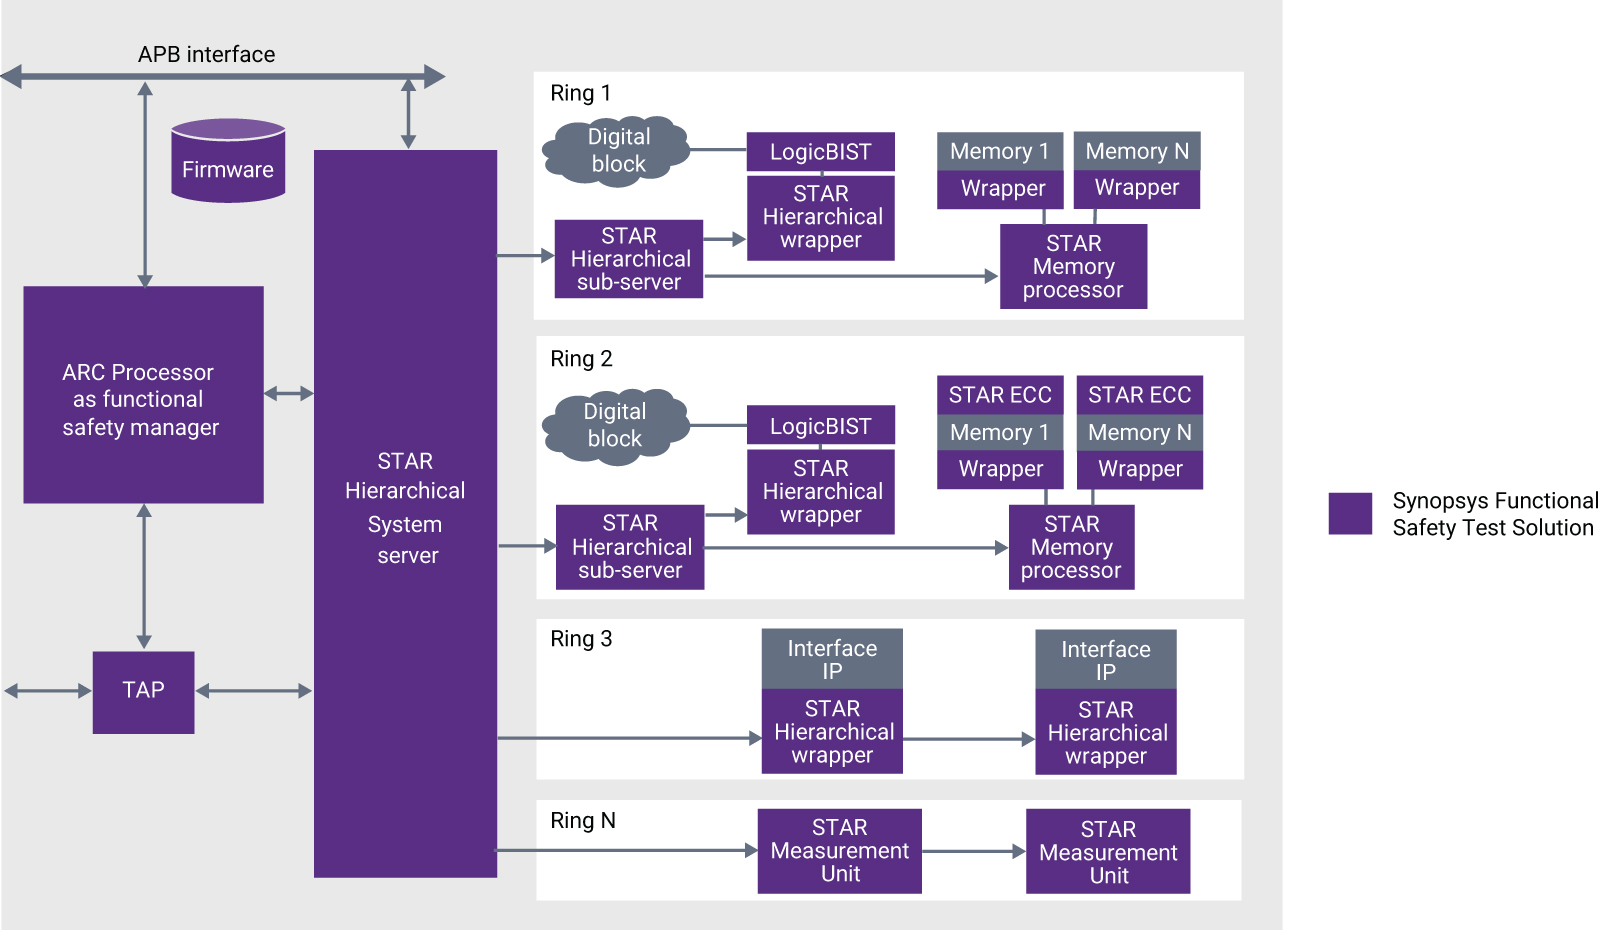 Figure 1: Synopsys Functional Safety Test Solution